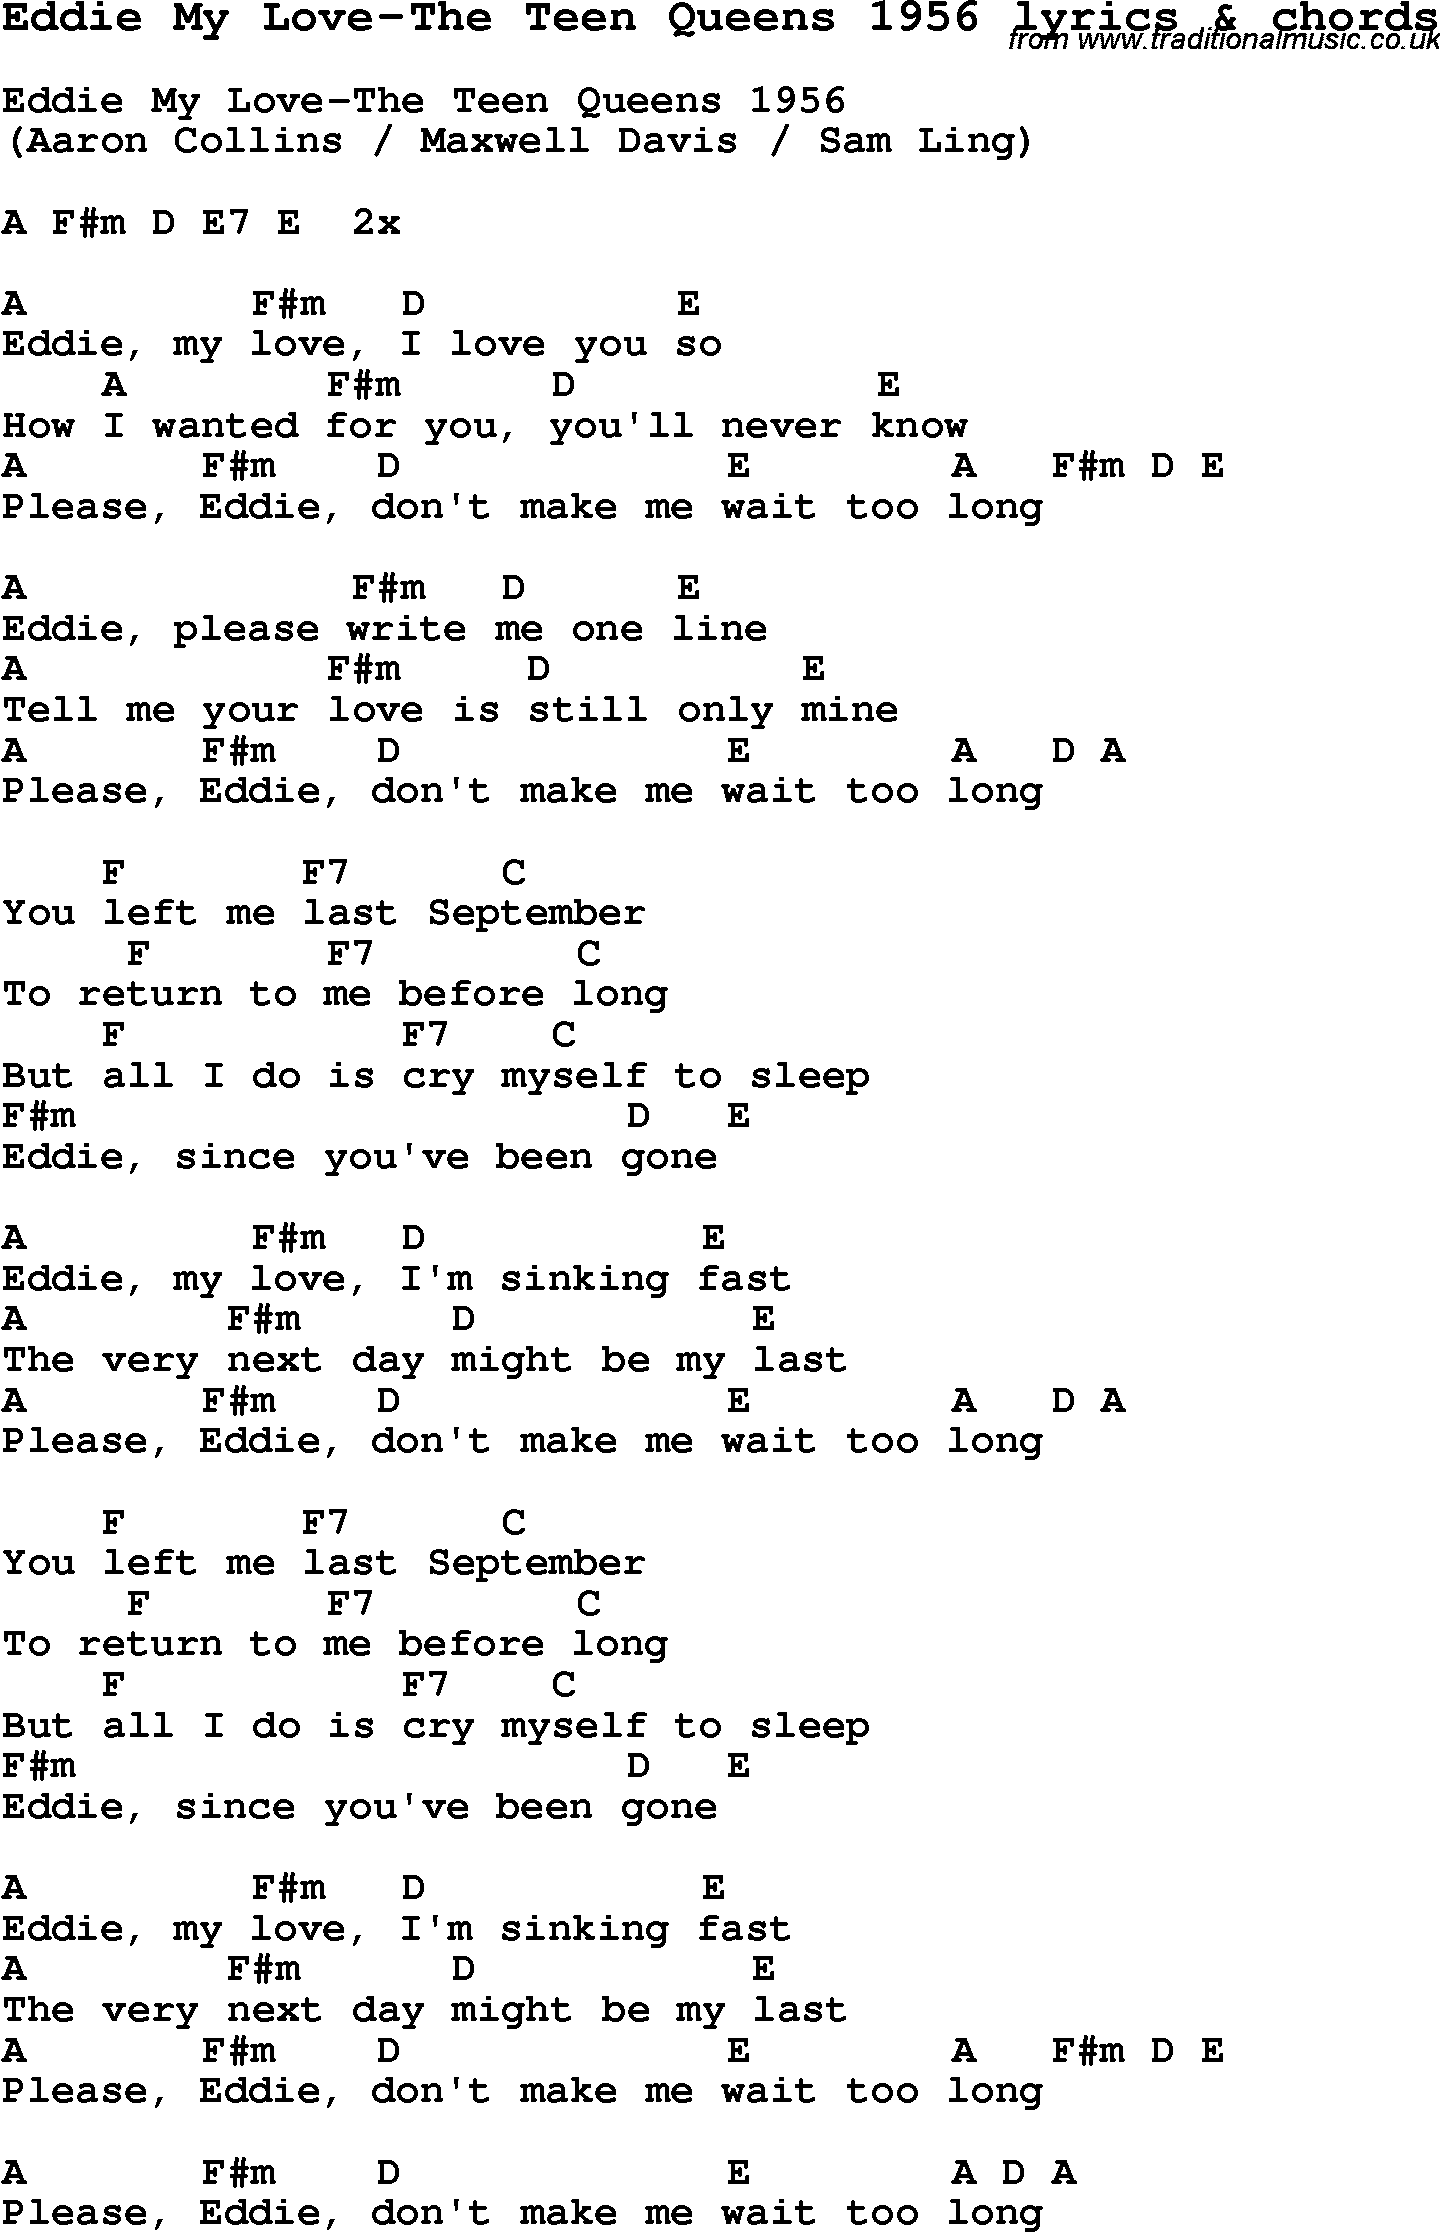 Love Song Lyrics for:Eddie My Love-The Teen Queens 1956 with chords.